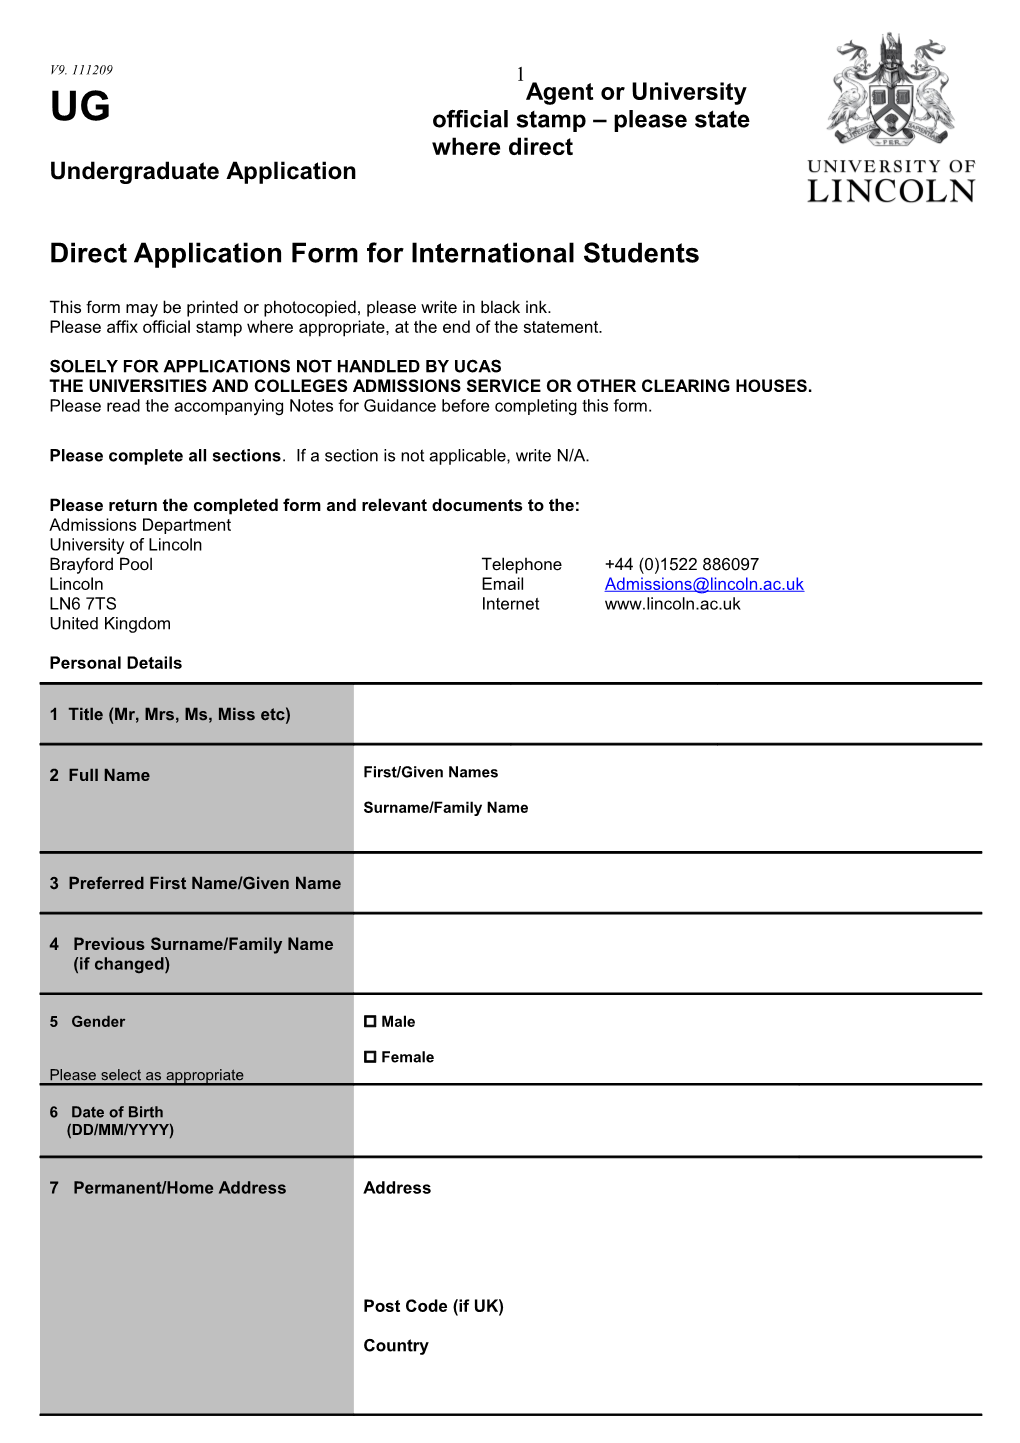 Direct Application Form for International Students